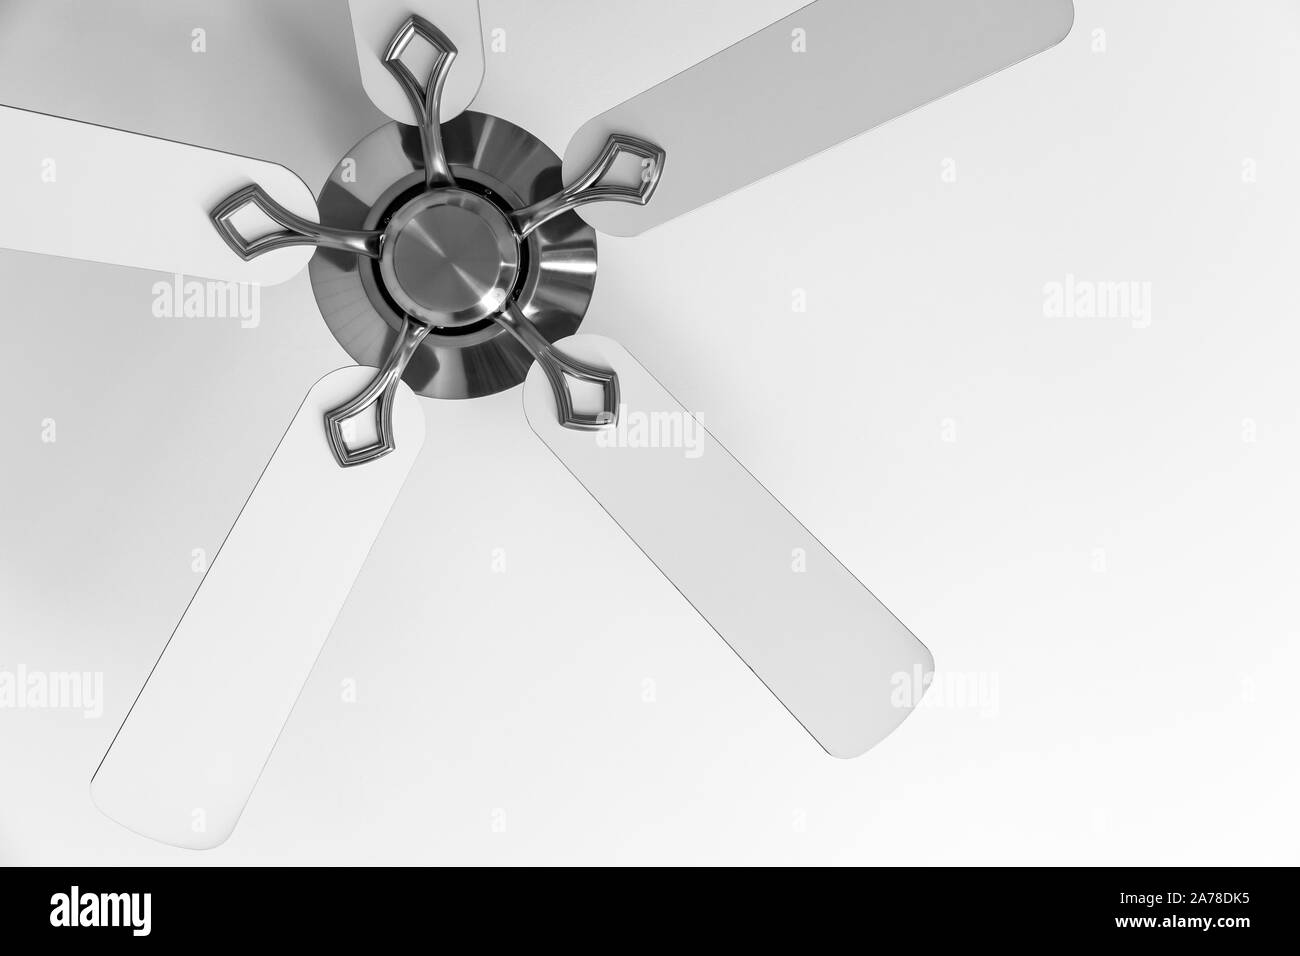 White ceiling fan fragment, close-up photo Stock Photo